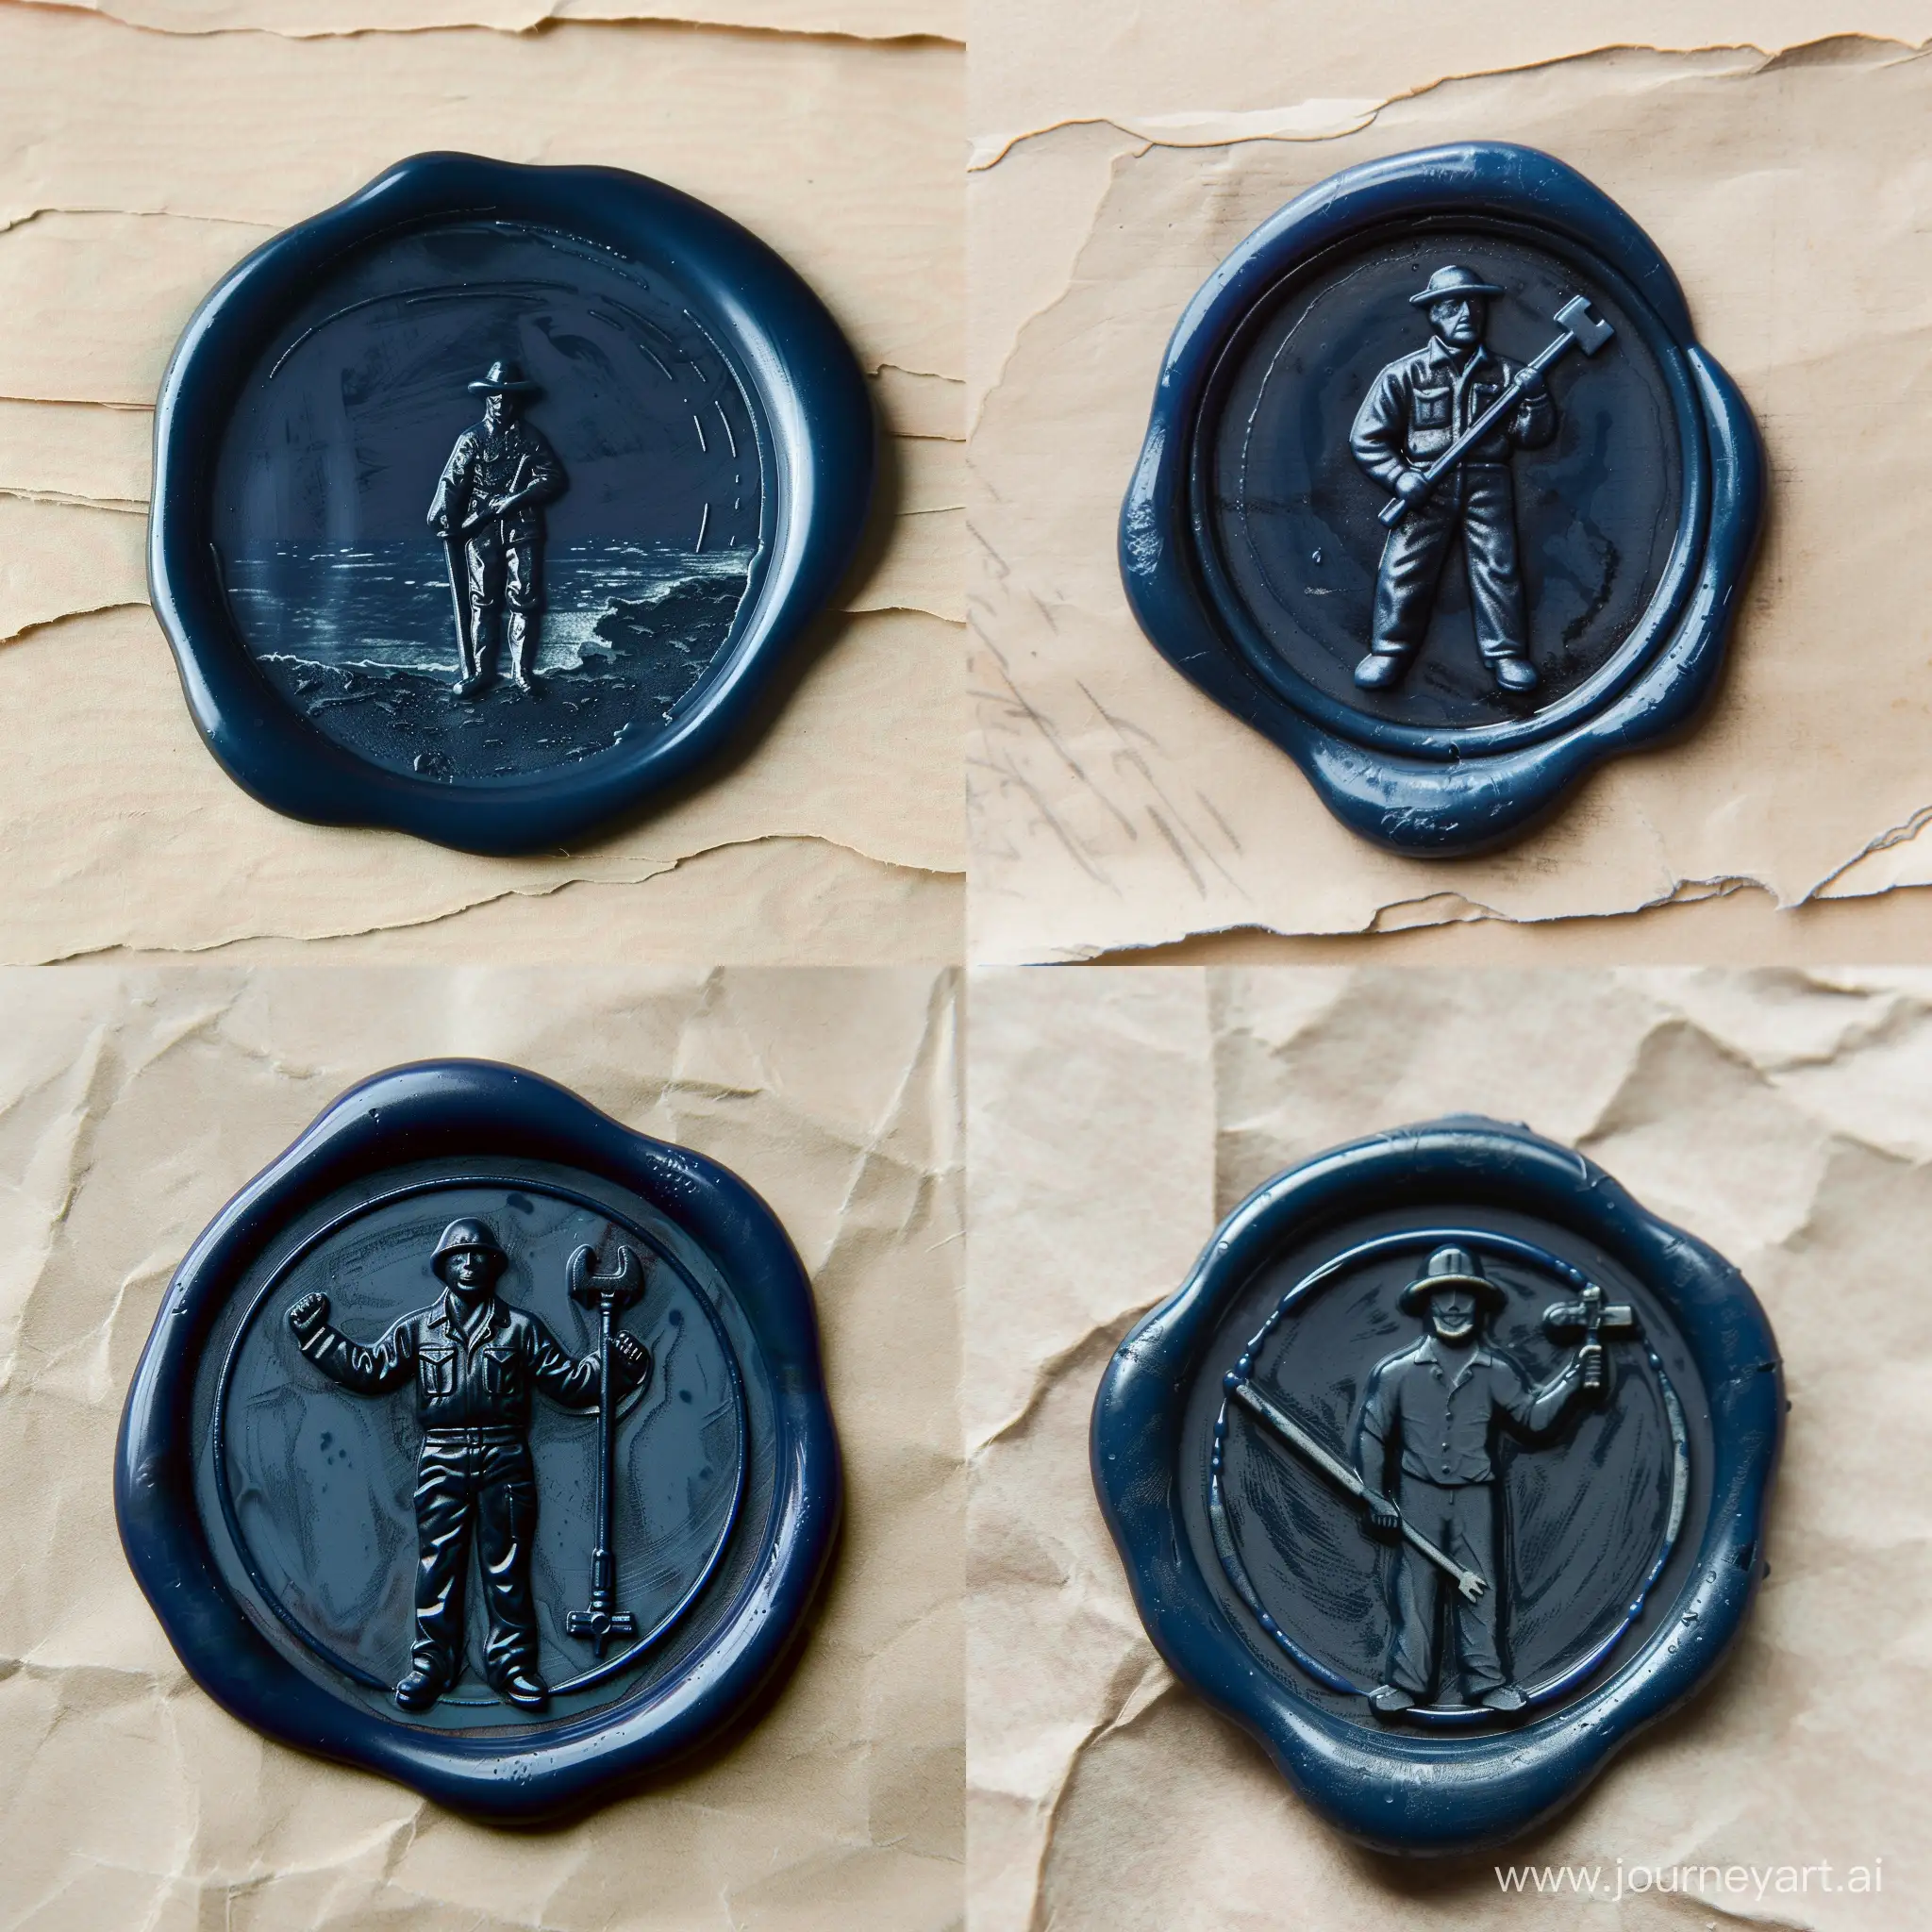 A hand-pressed Repair Man wax seal, navy blue hue, with natural imperfections and irregular edges, top-down view, set on vintage paper texture